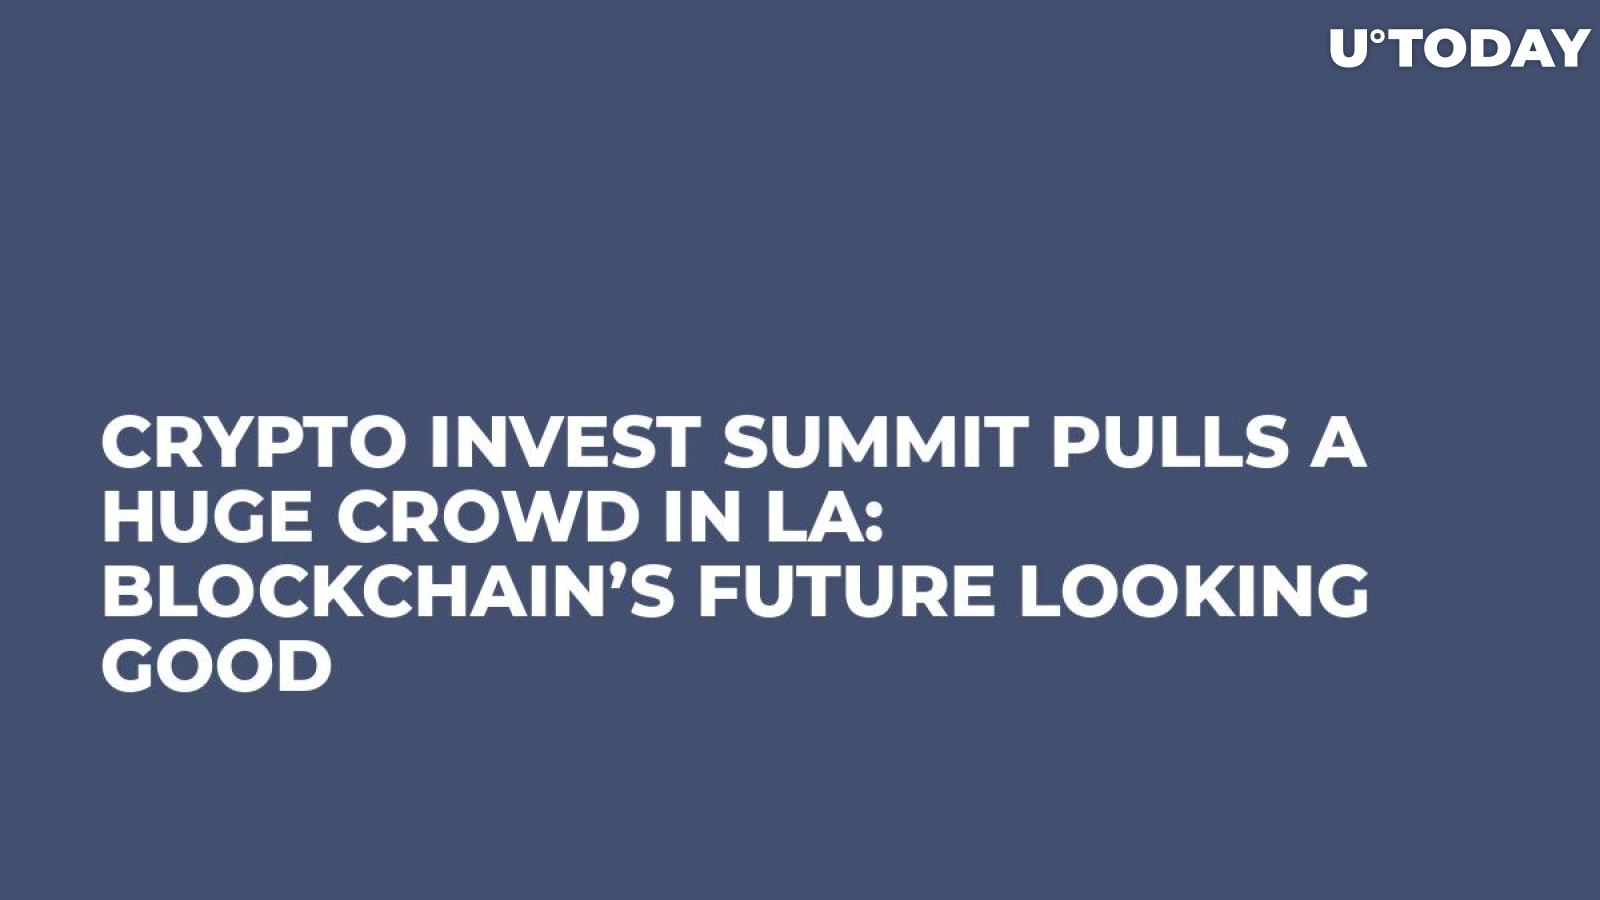 Crypto Invest Summit Pulls a Huge Crowd in LA: Blockchain’s Future Looking Good